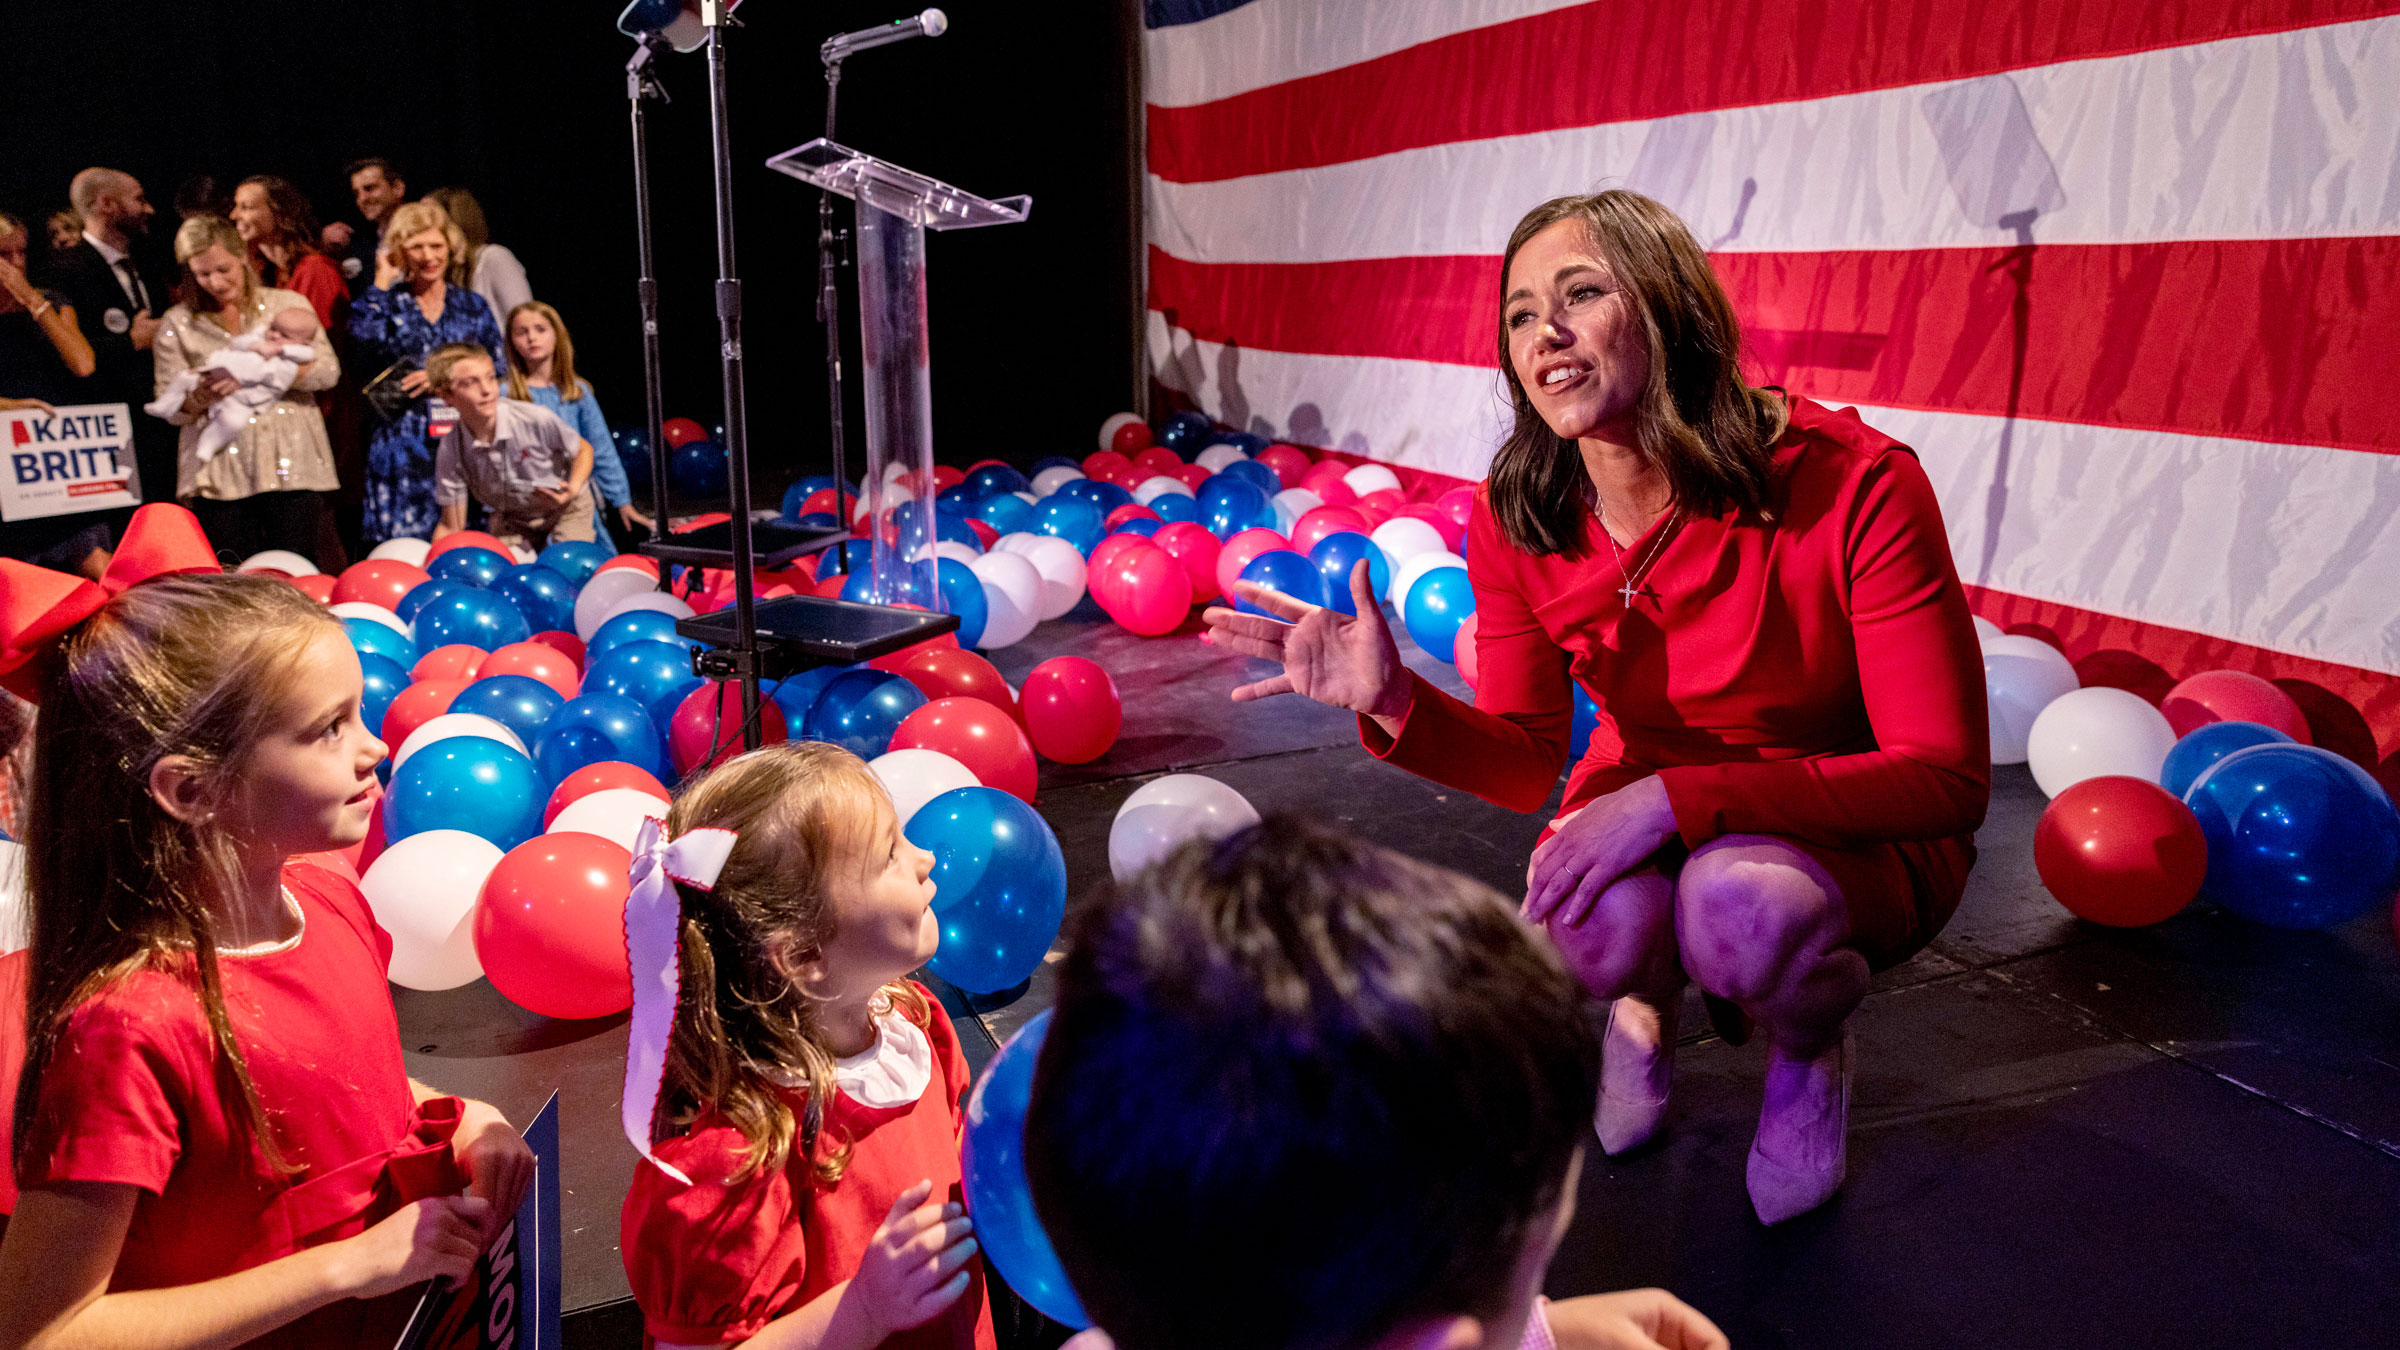 Katie Britt greets children at her election night watch party in Montgomery, Alabama, on Tuesday.